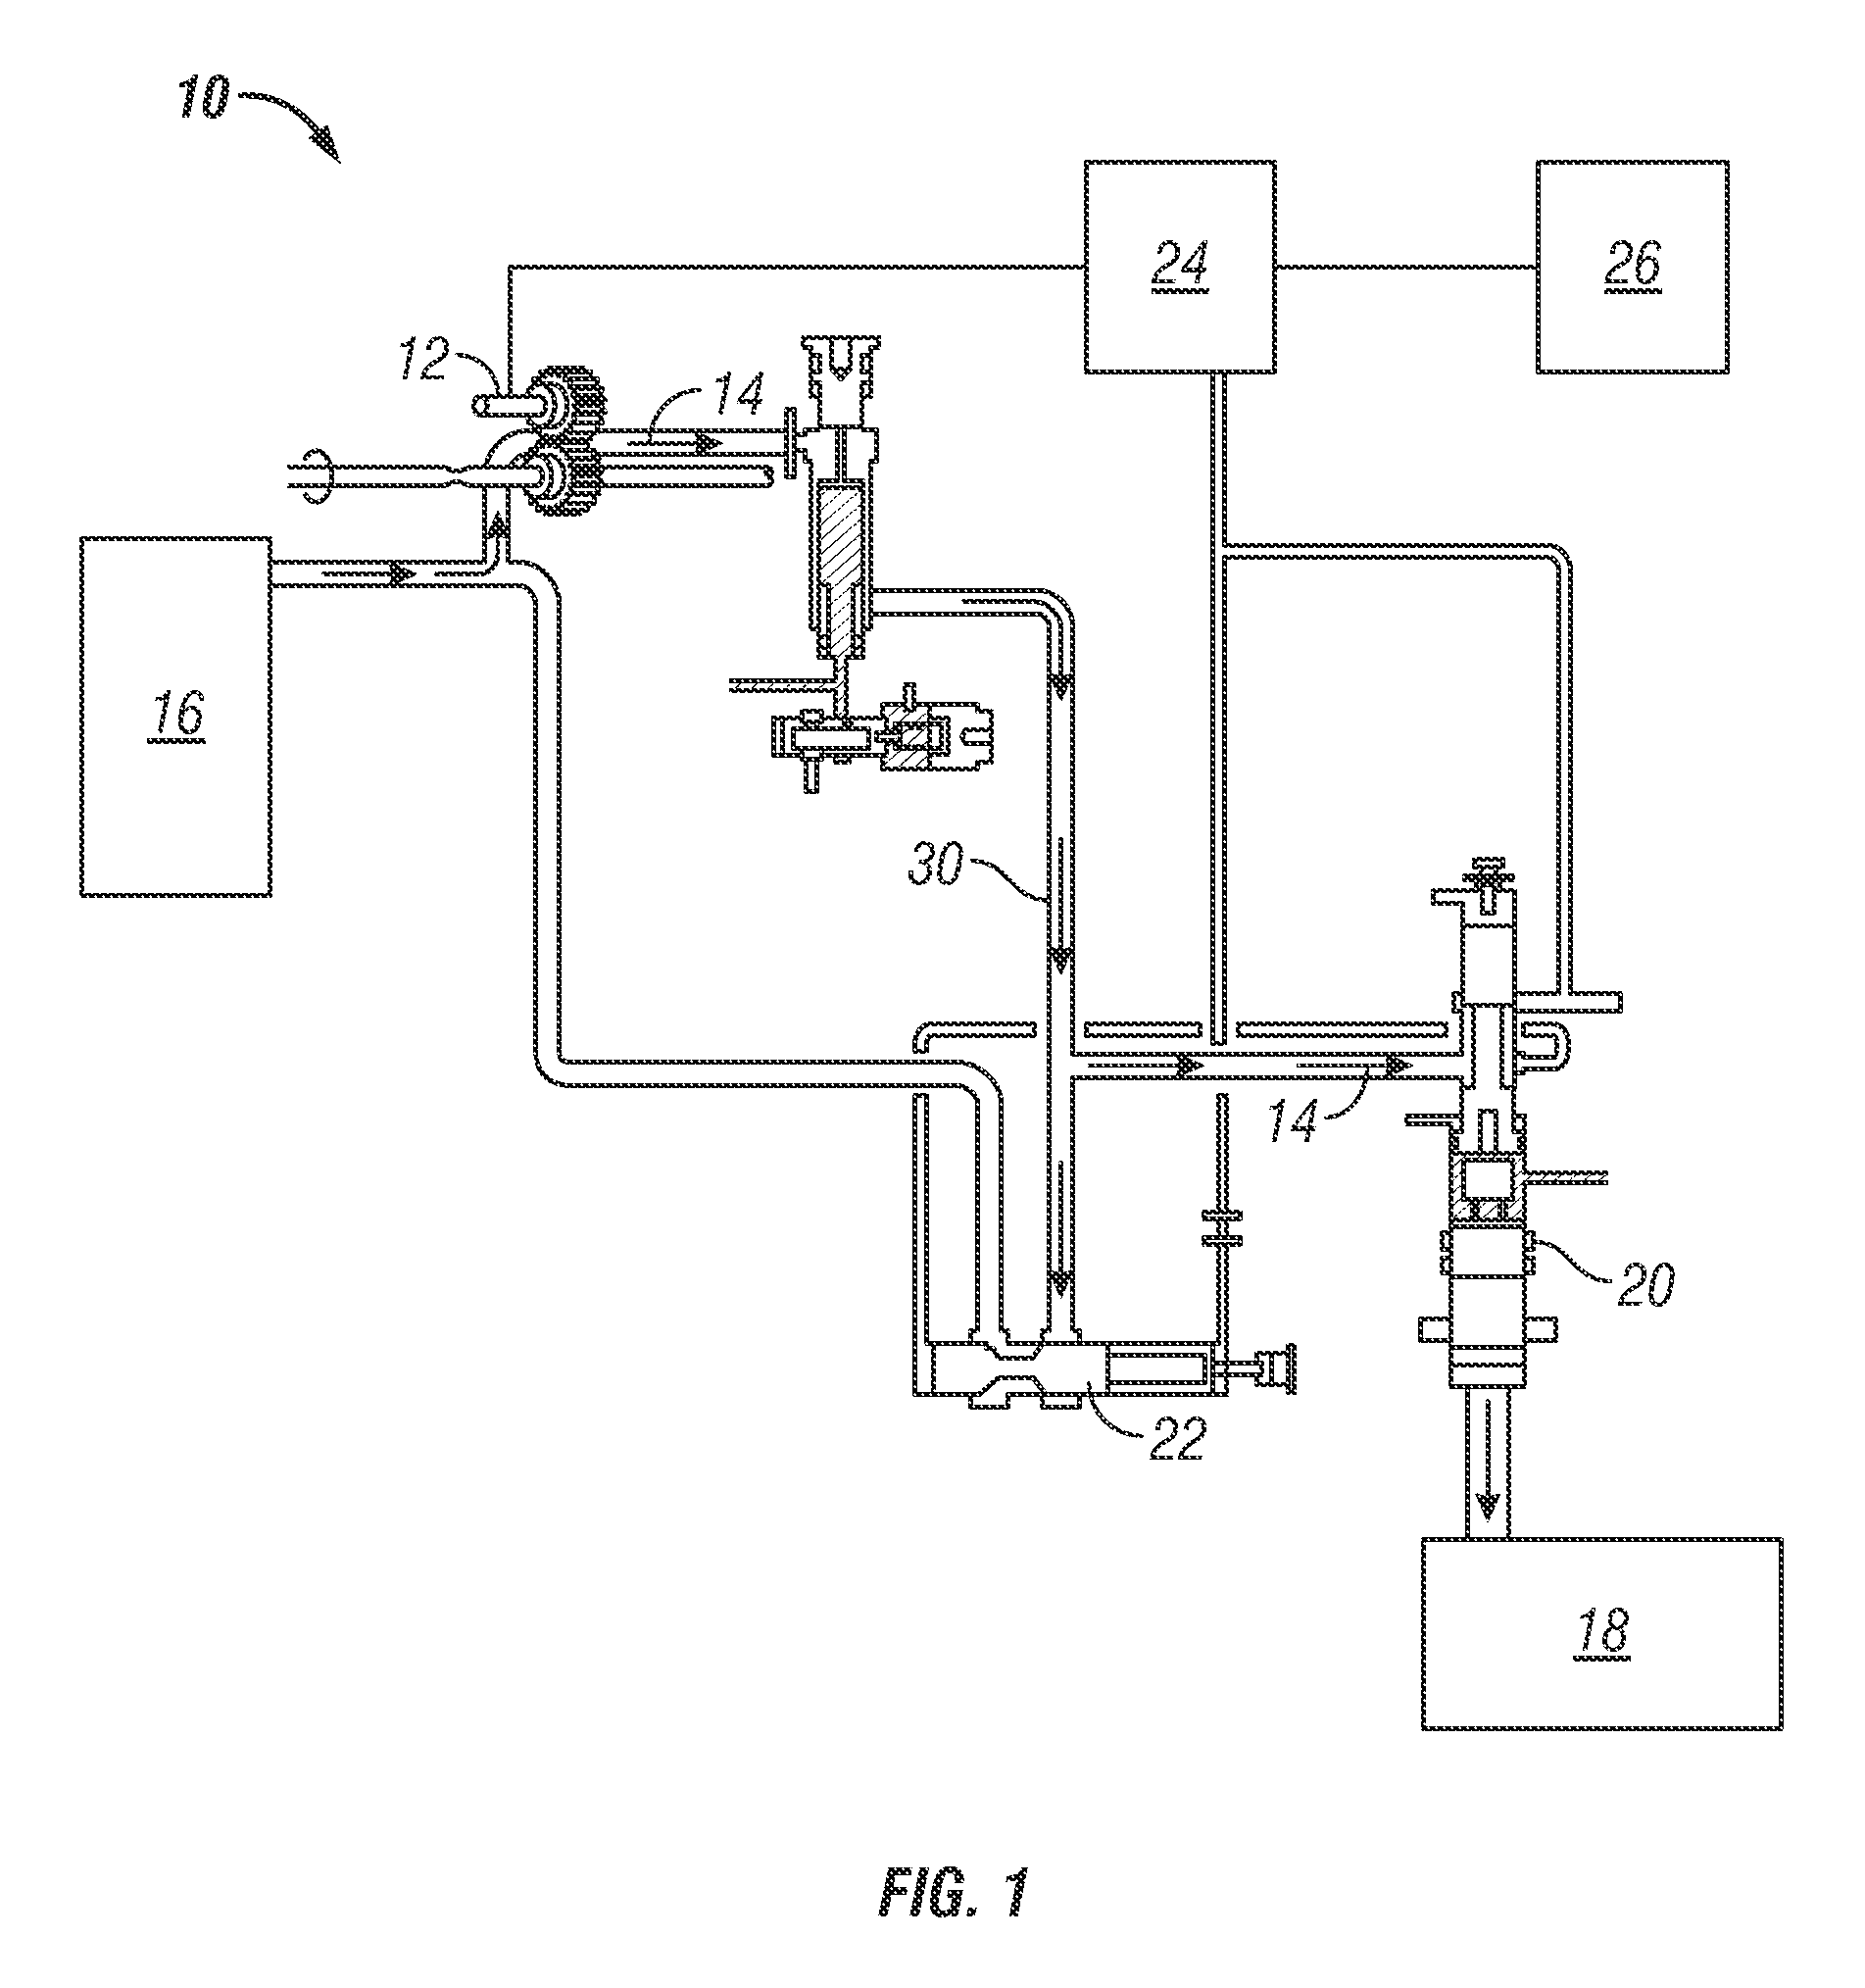 System and method for fuel system health monitoring